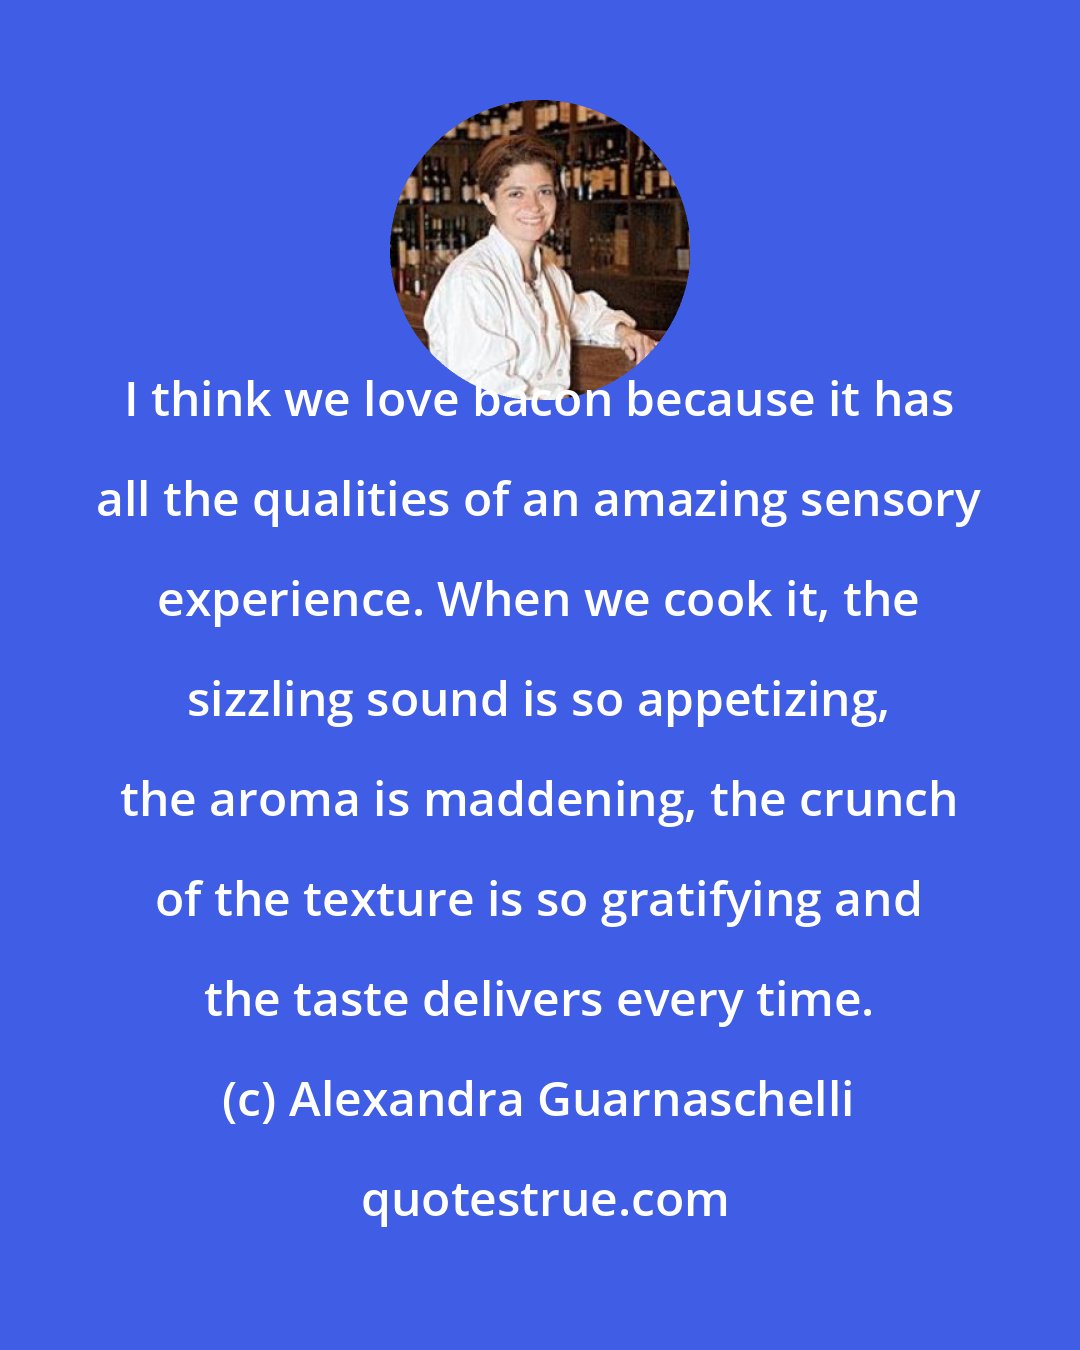 Alexandra Guarnaschelli: I think we love bacon because it has all the qualities of an amazing sensory experience. When we cook it, the sizzling sound is so appetizing, the aroma is maddening, the crunch of the texture is so gratifying and the taste delivers every time.